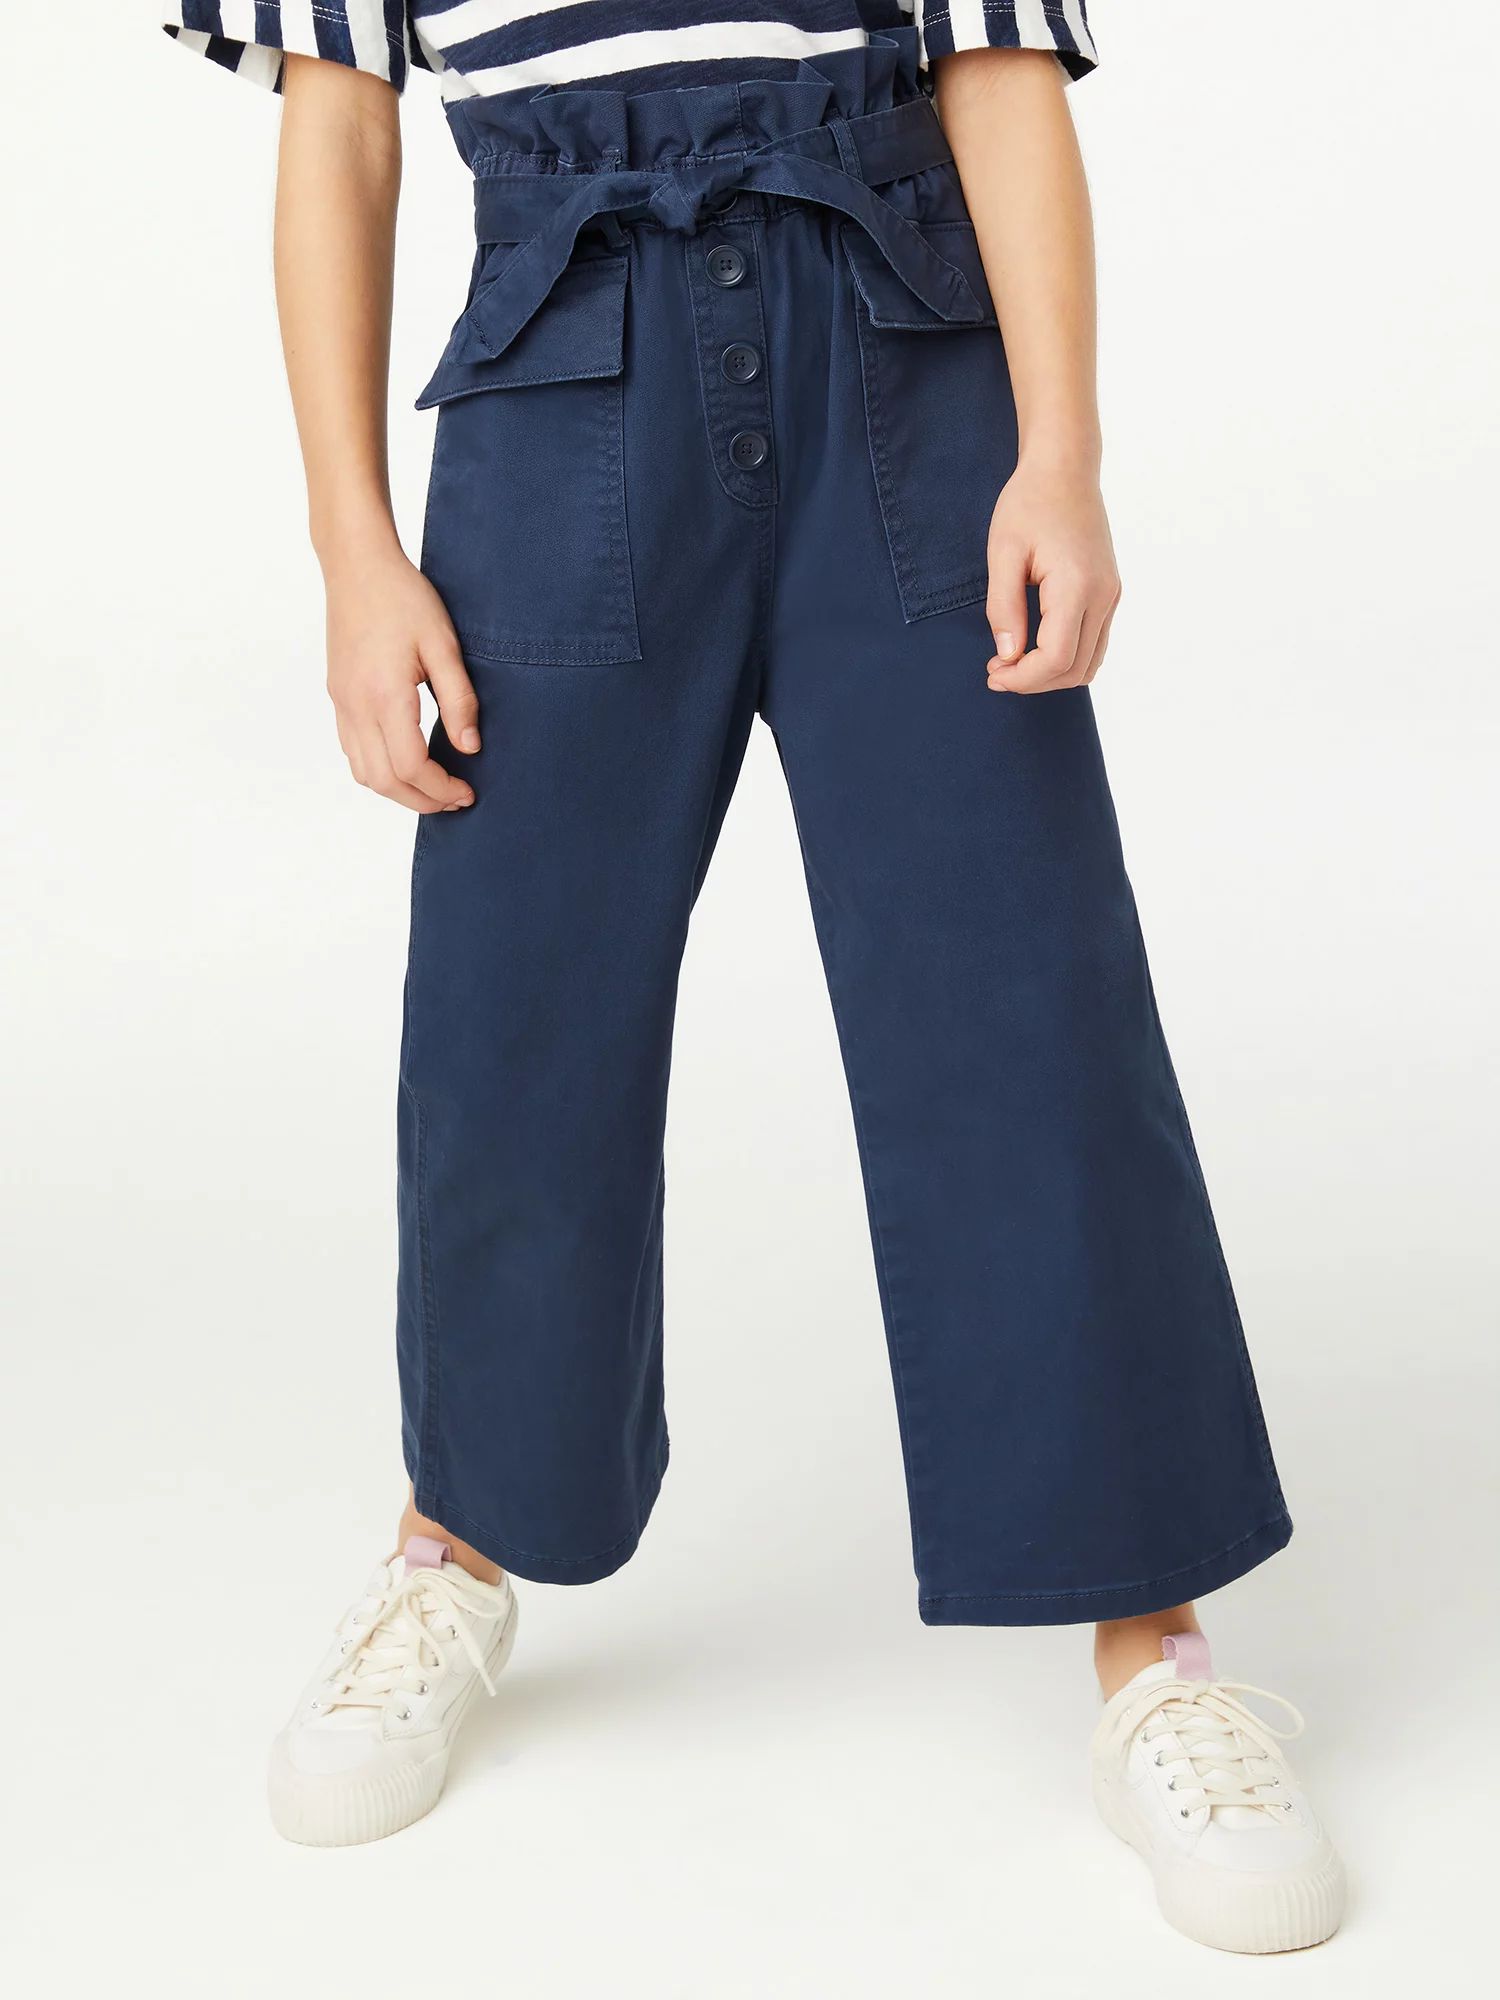 Free Assembly Girls High-Rise Wide Leg Belted Crop Pants, Sizes 5-18 | Walmart (US)